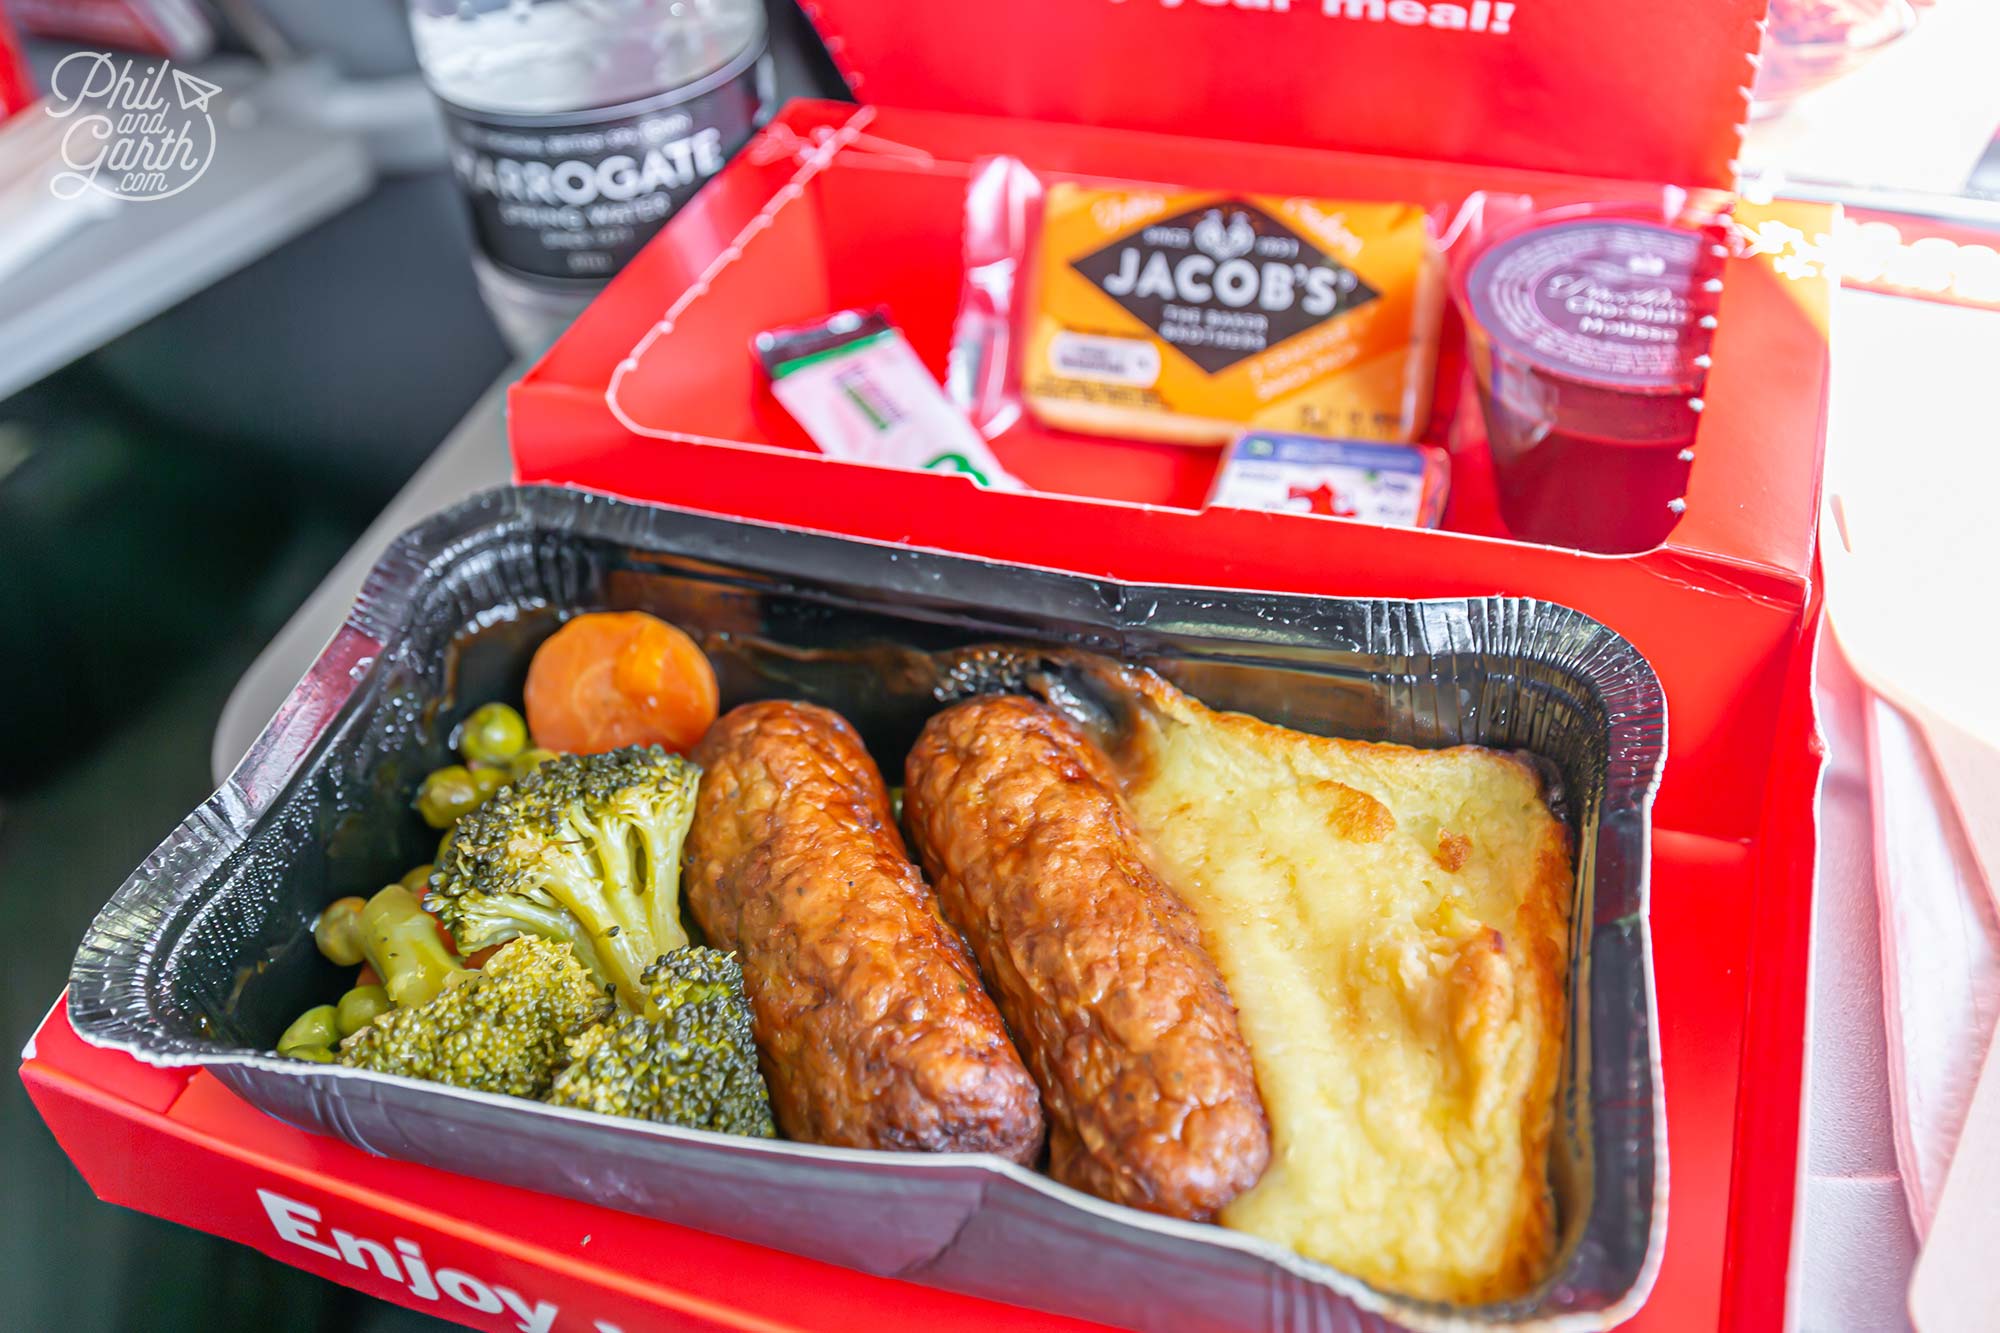 Jet2's inflight meals are actually quite tasty. Gareth had the sausage and mash